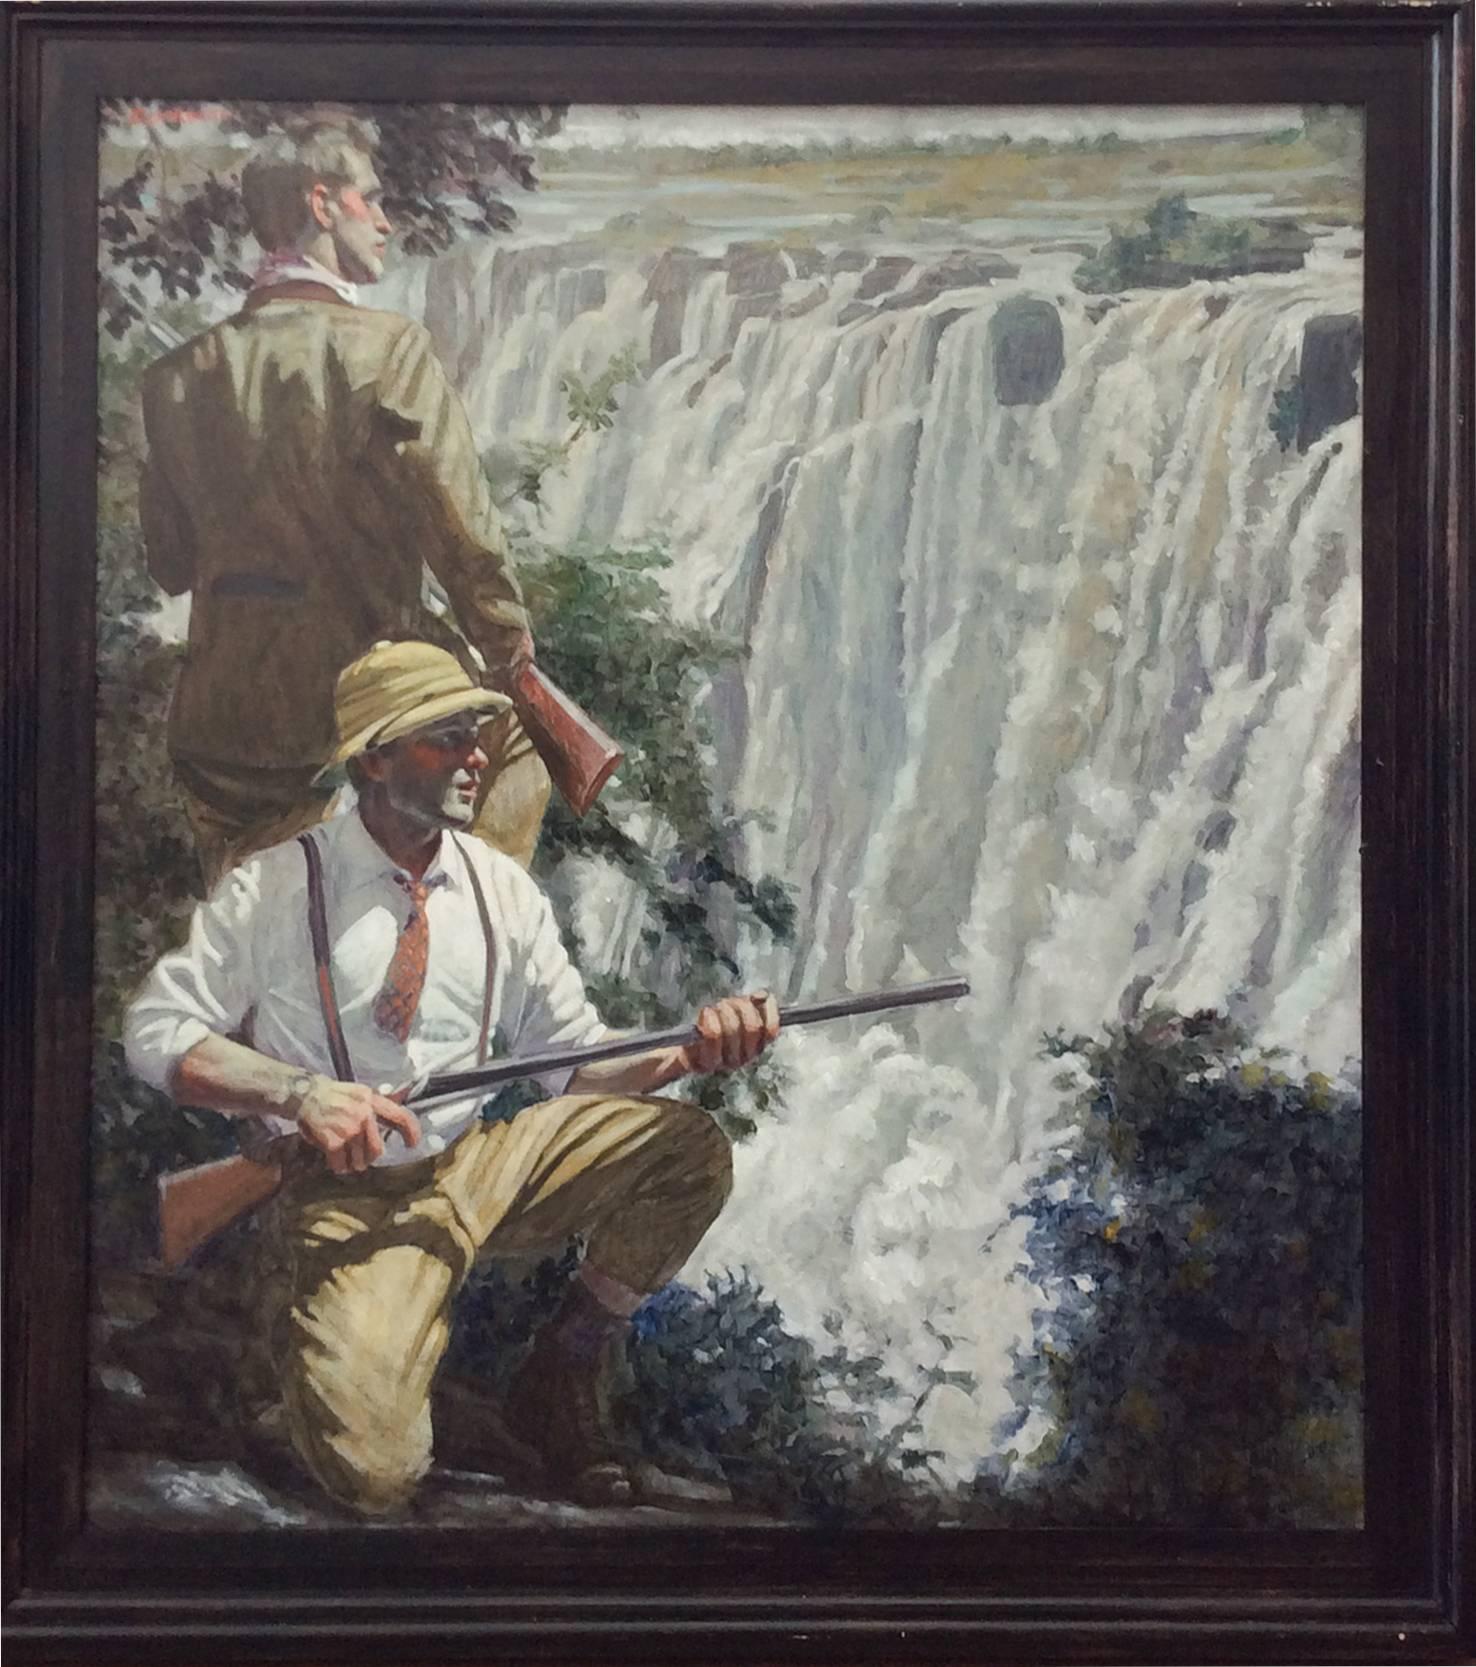 Mark Beard Figurative Painting - Waterfall (Figurative Oil Painting of Two Men Hunting and a Waterfall)